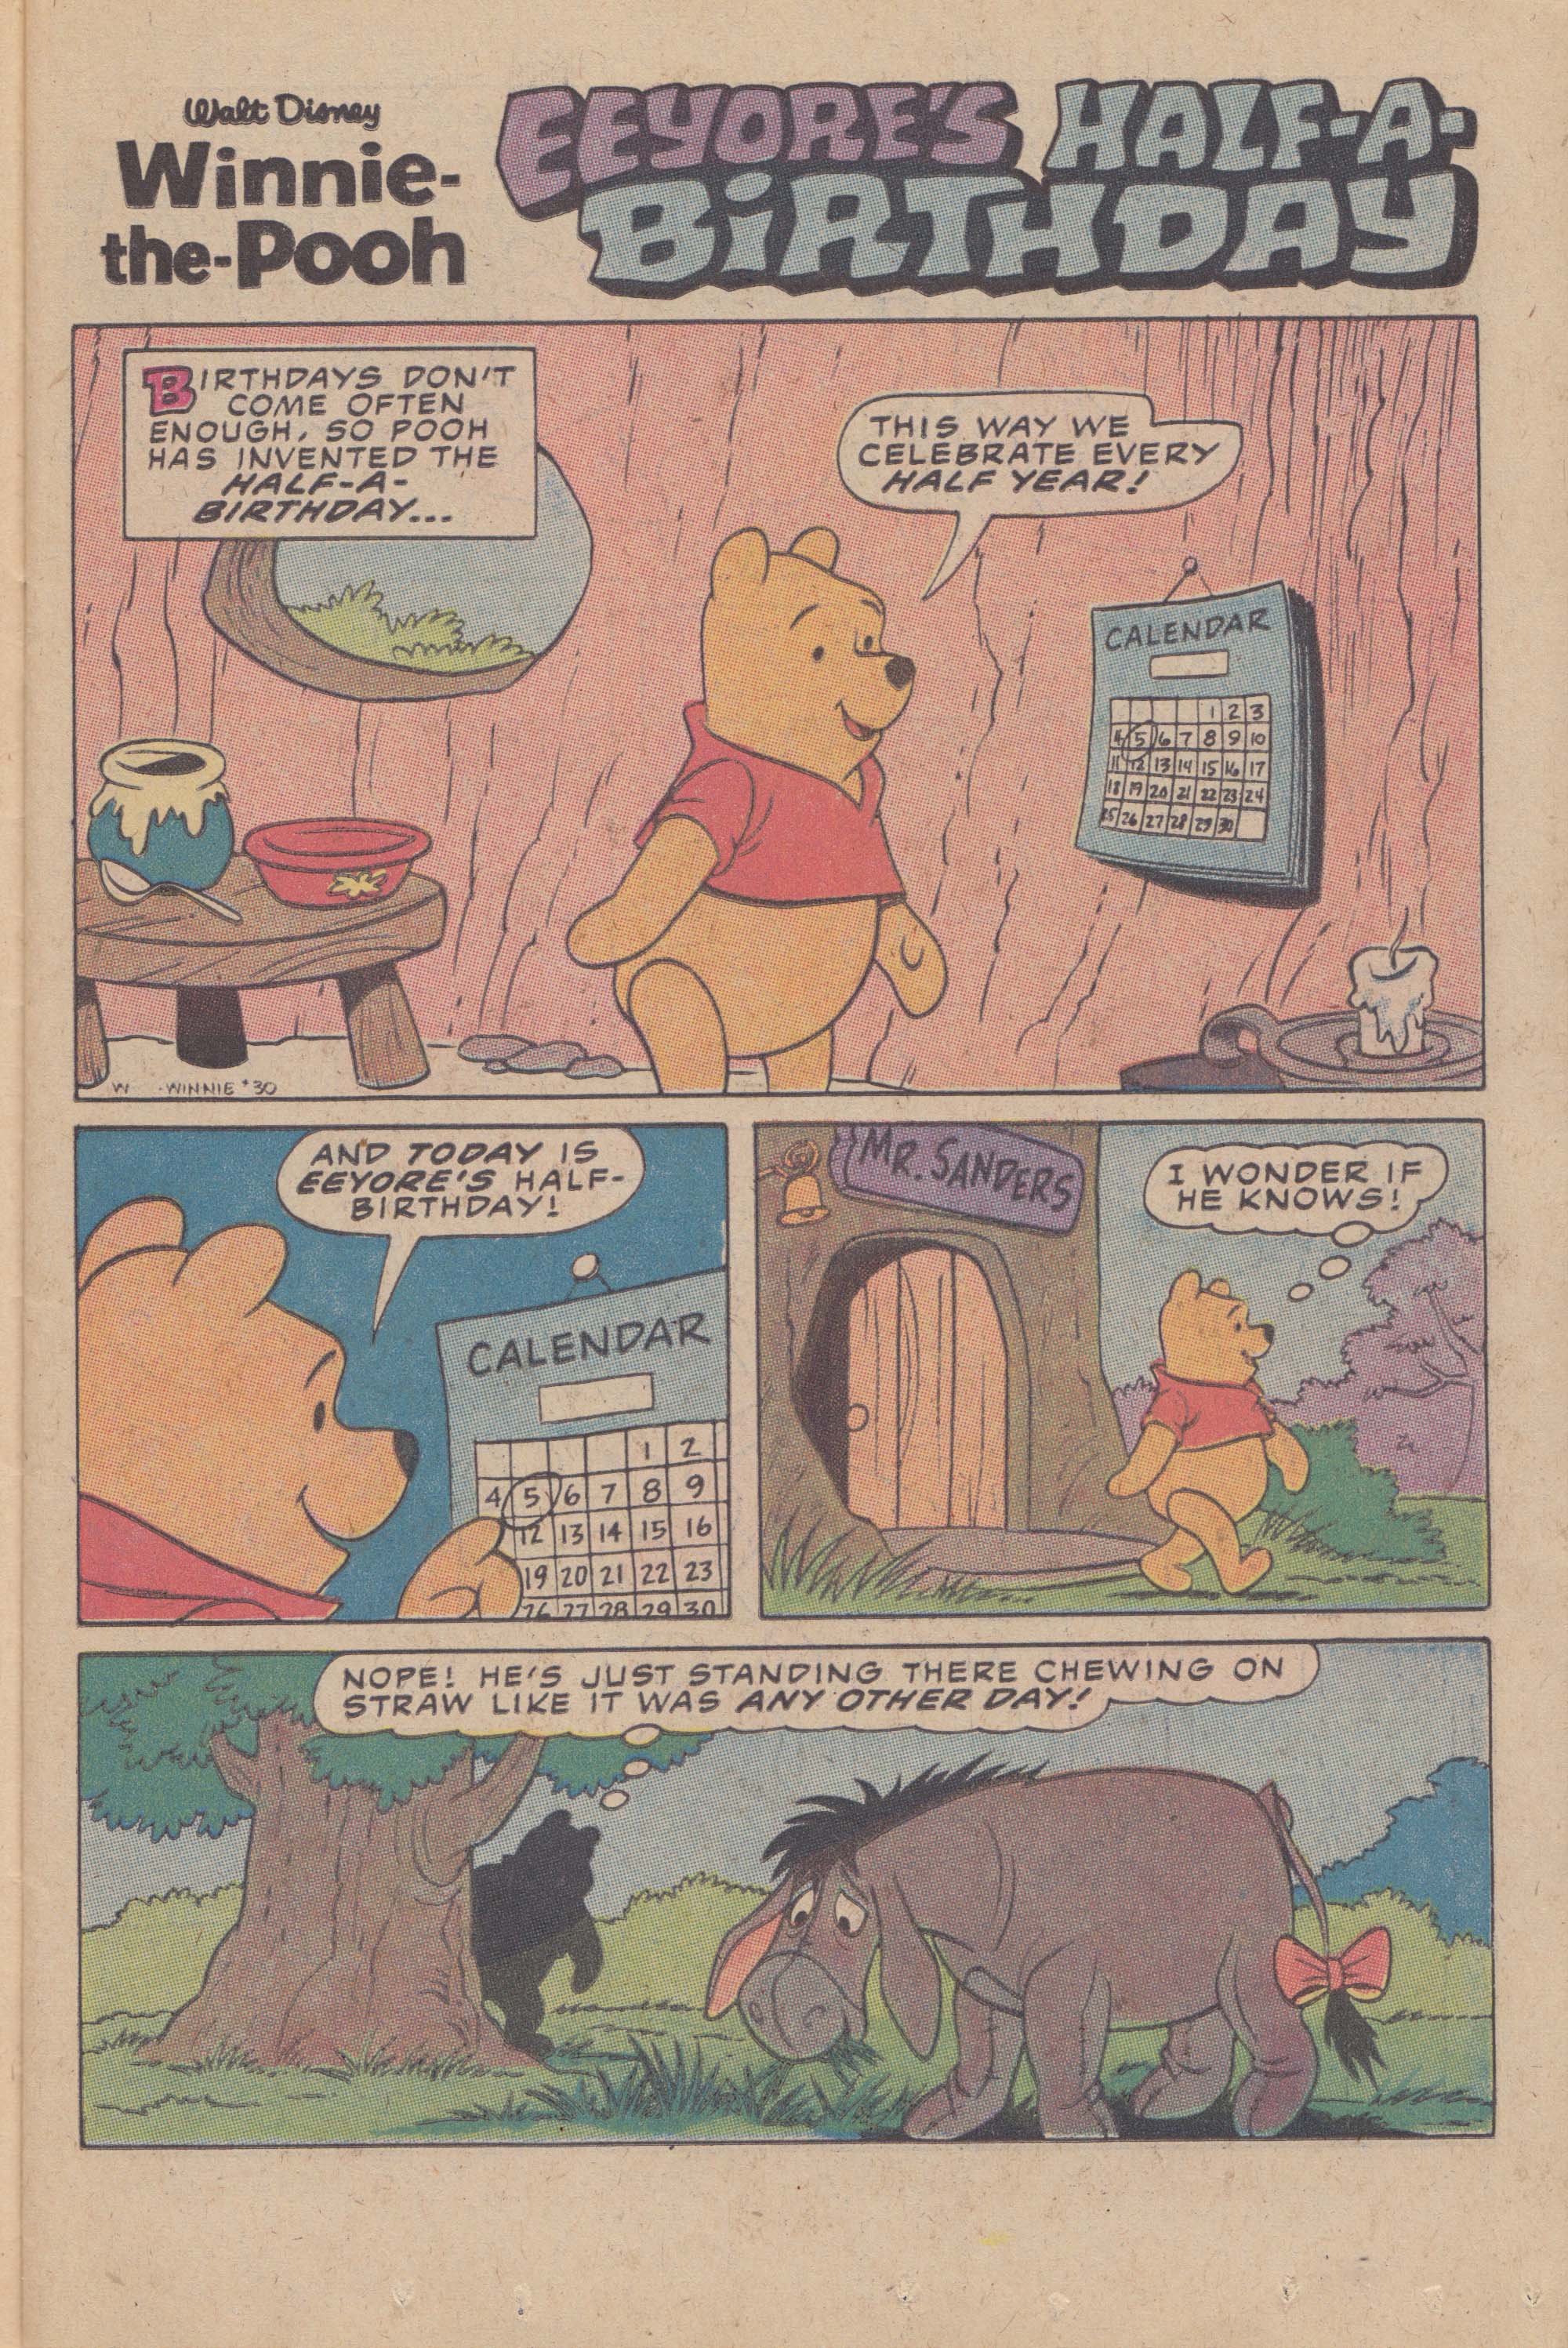 Read online Winnie-the-Pooh comic -  Issue #30 - 11